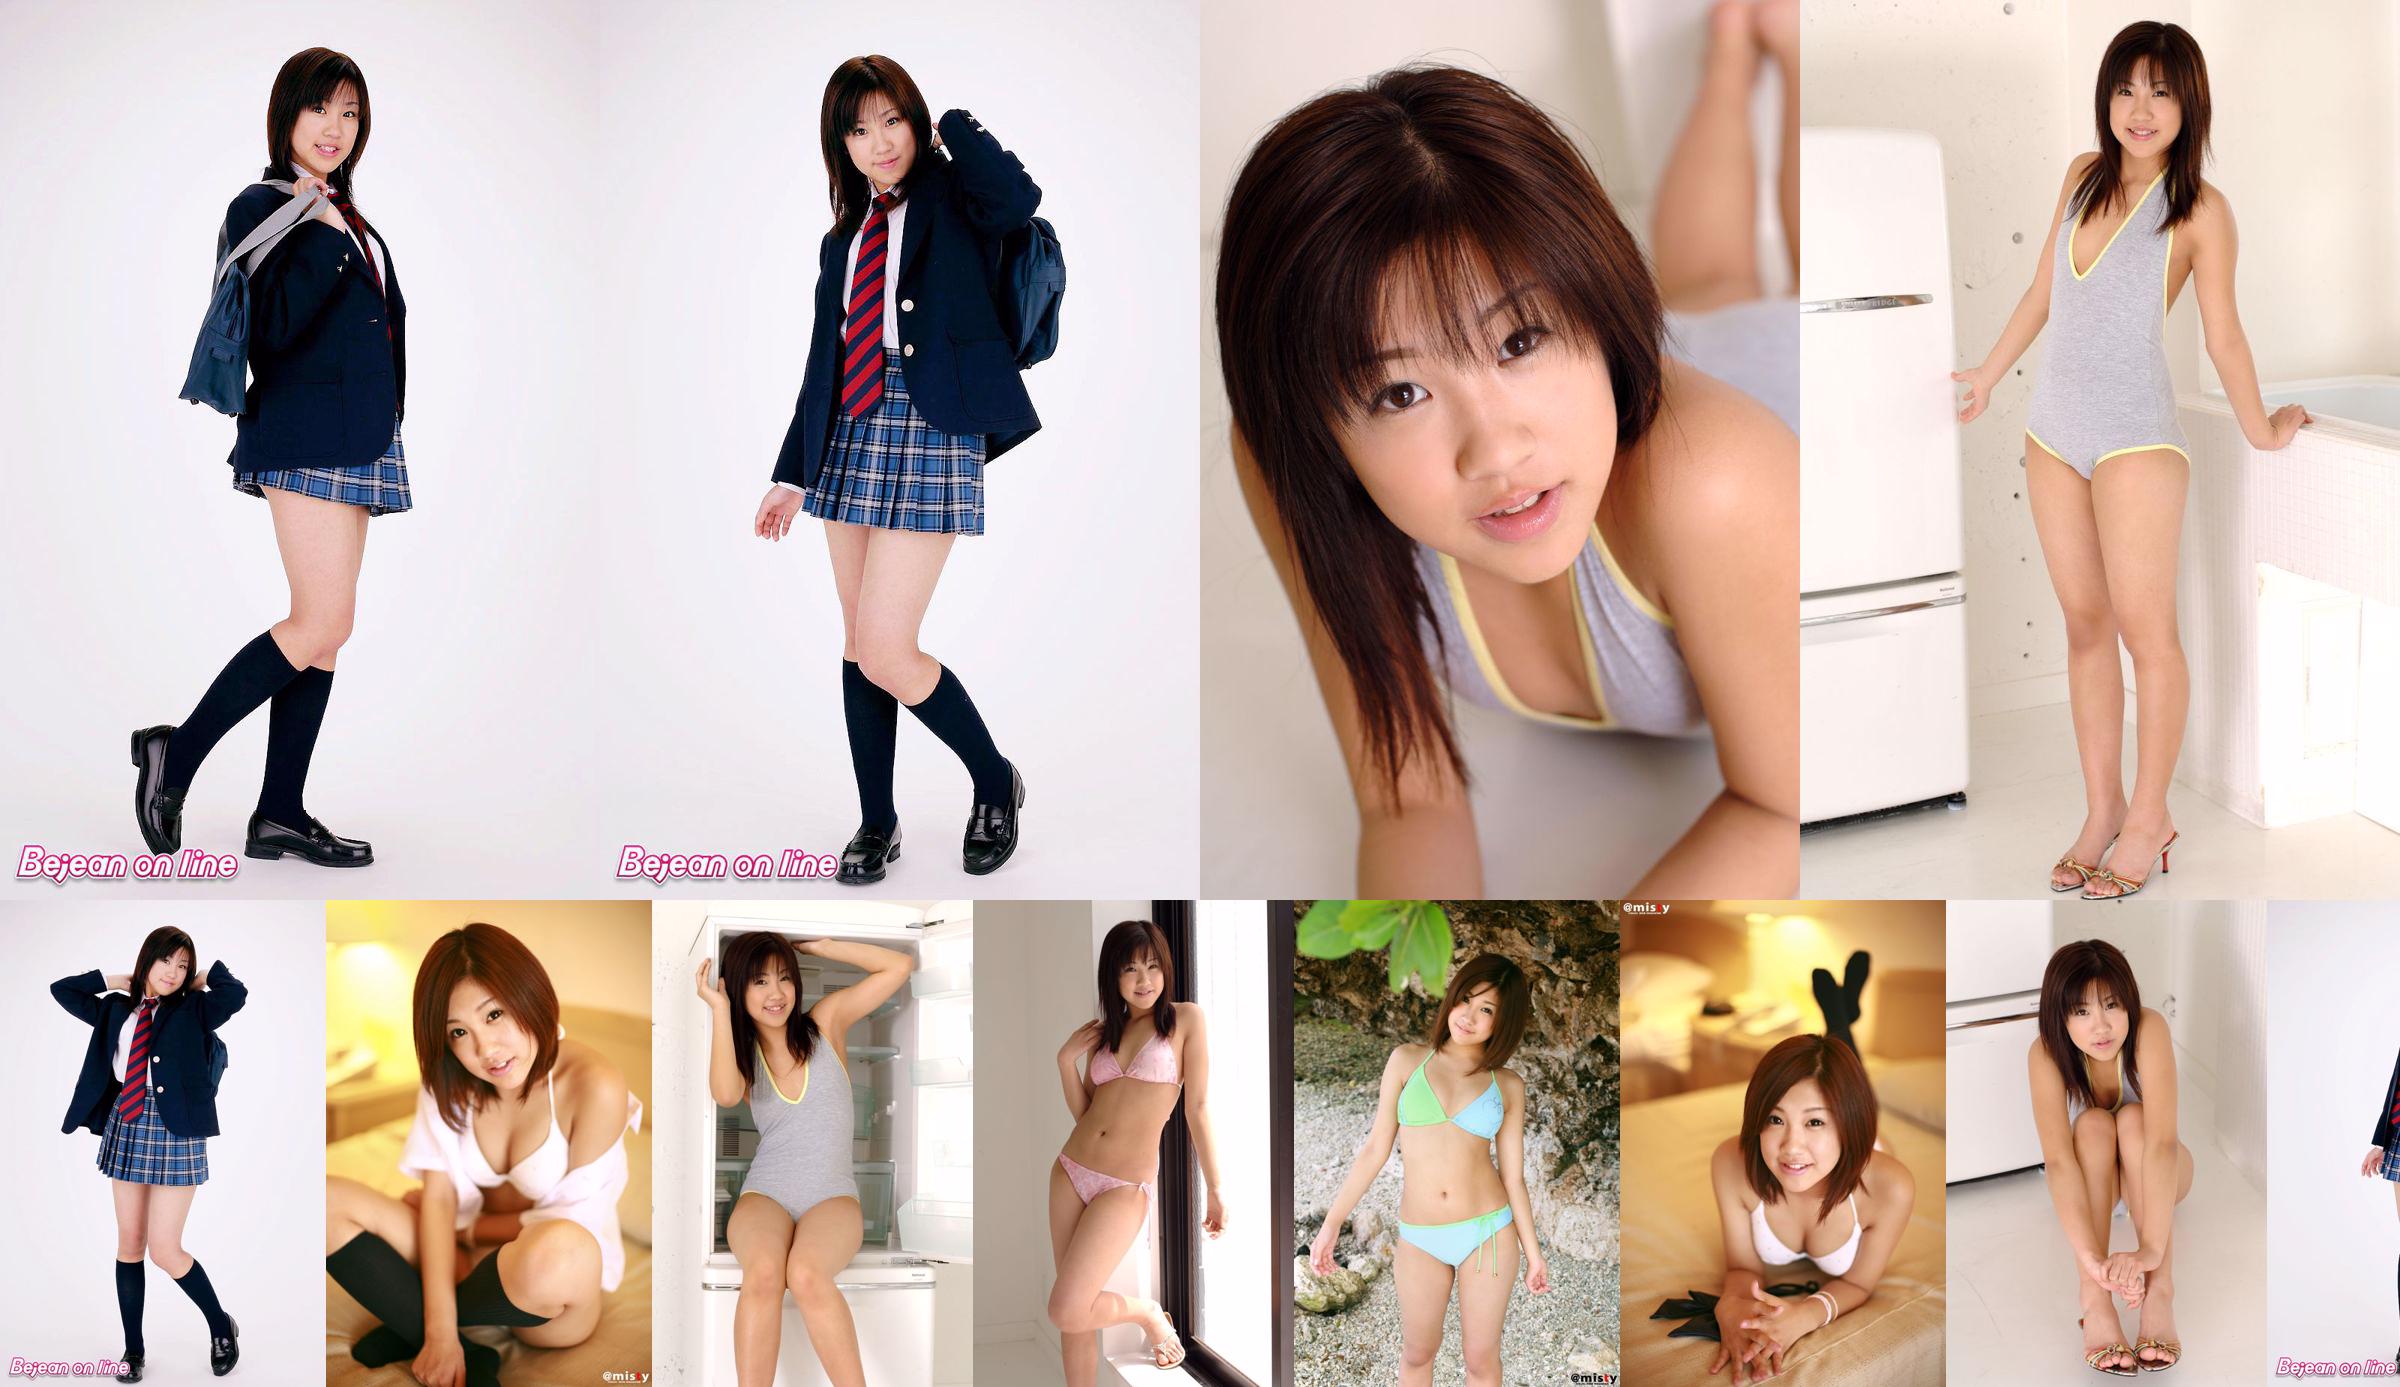 Private Bejean Girls’ School Maho Nagase 永瀬麻帆 [Bejean On Line] No.506a80 Page 1